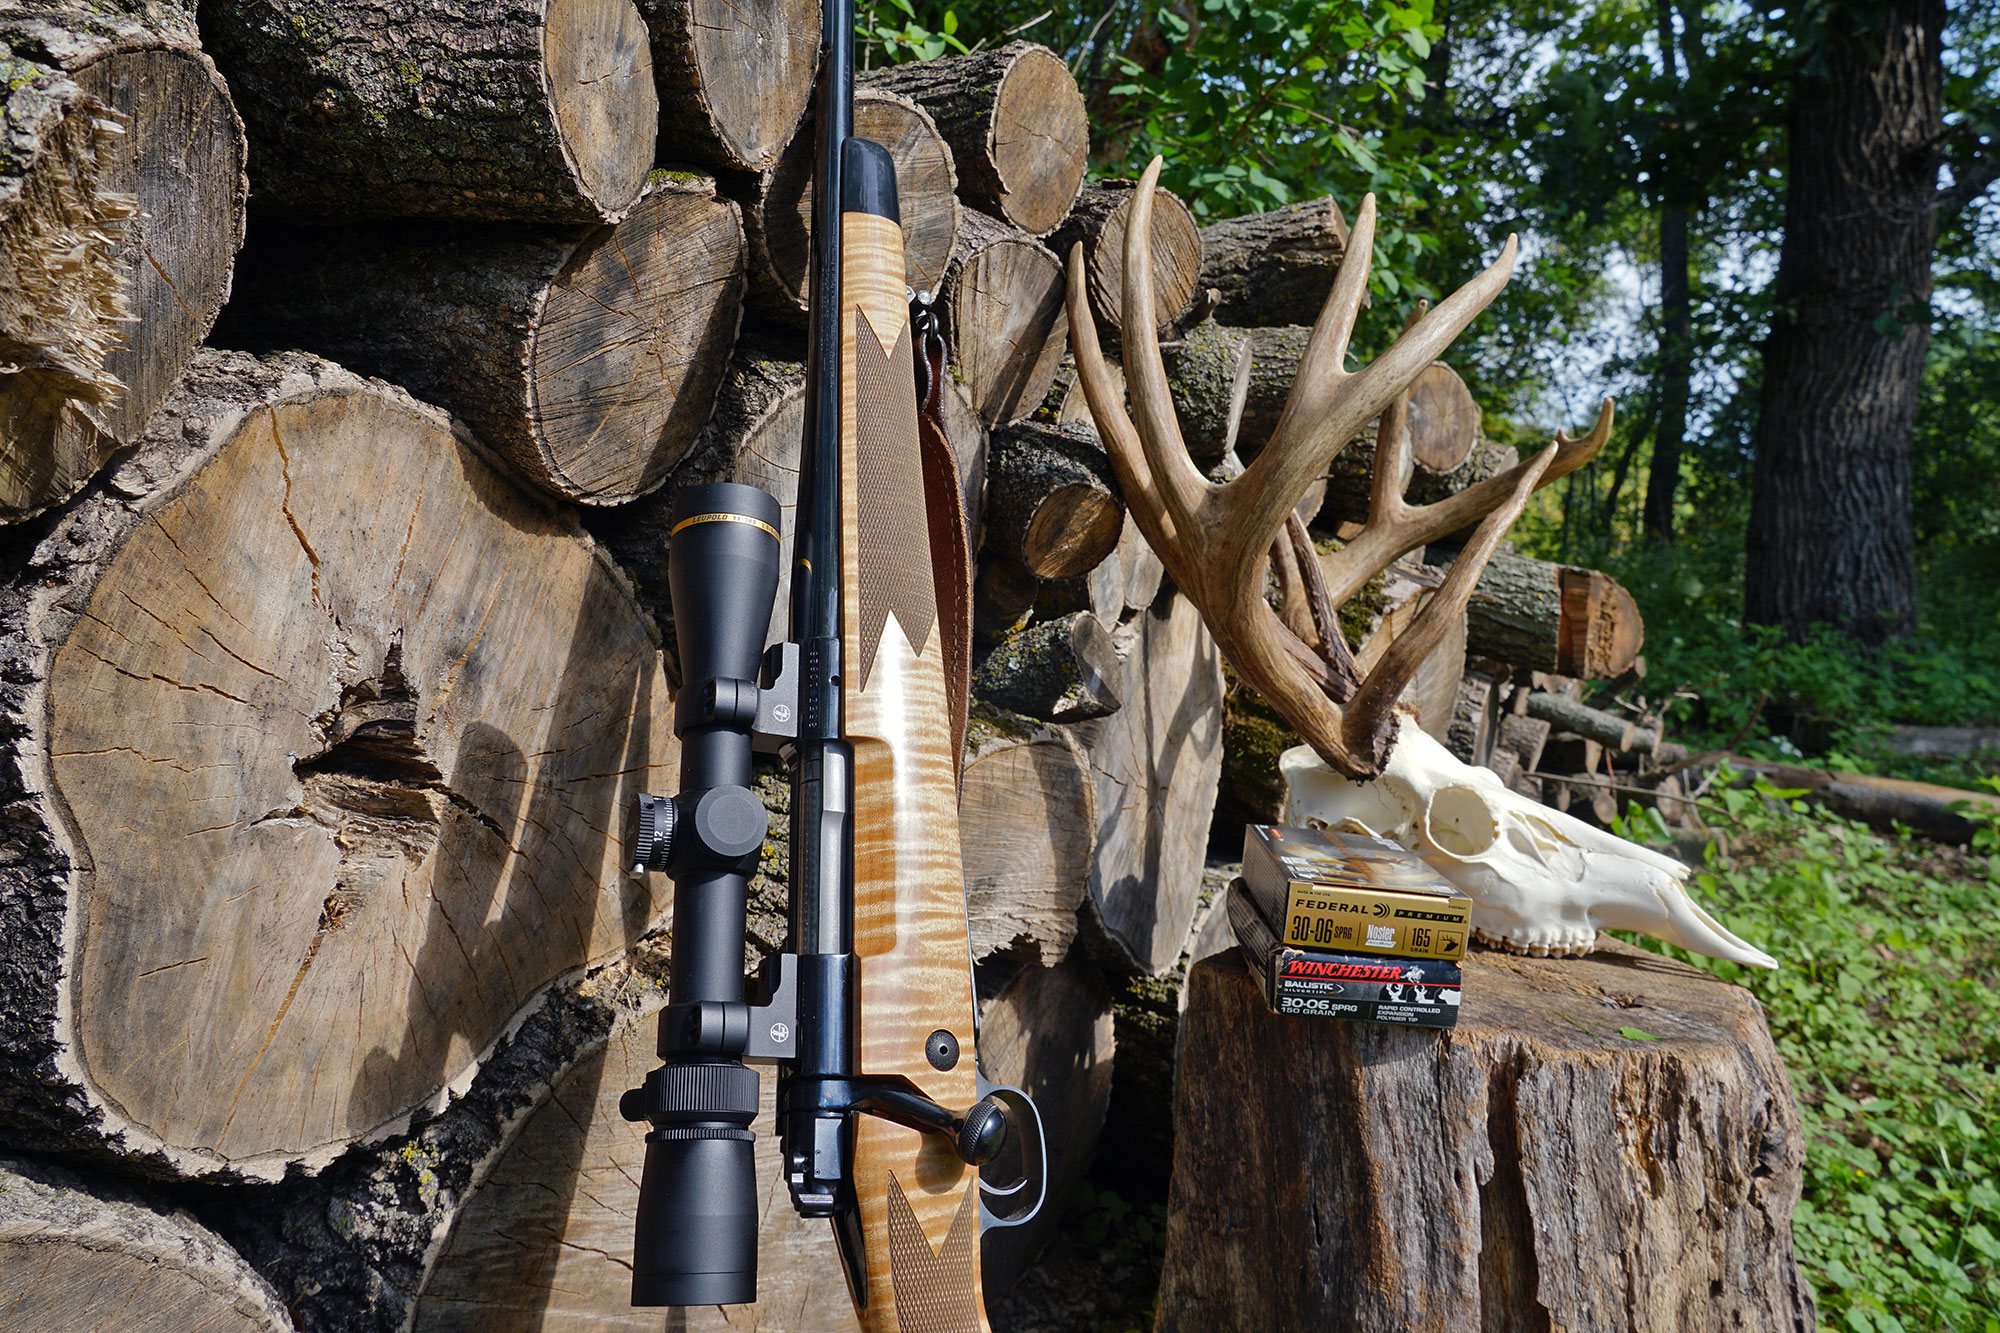 Business Success in Outdoor Gear, Hunting & Fishing Supplies, Guns & Ammo